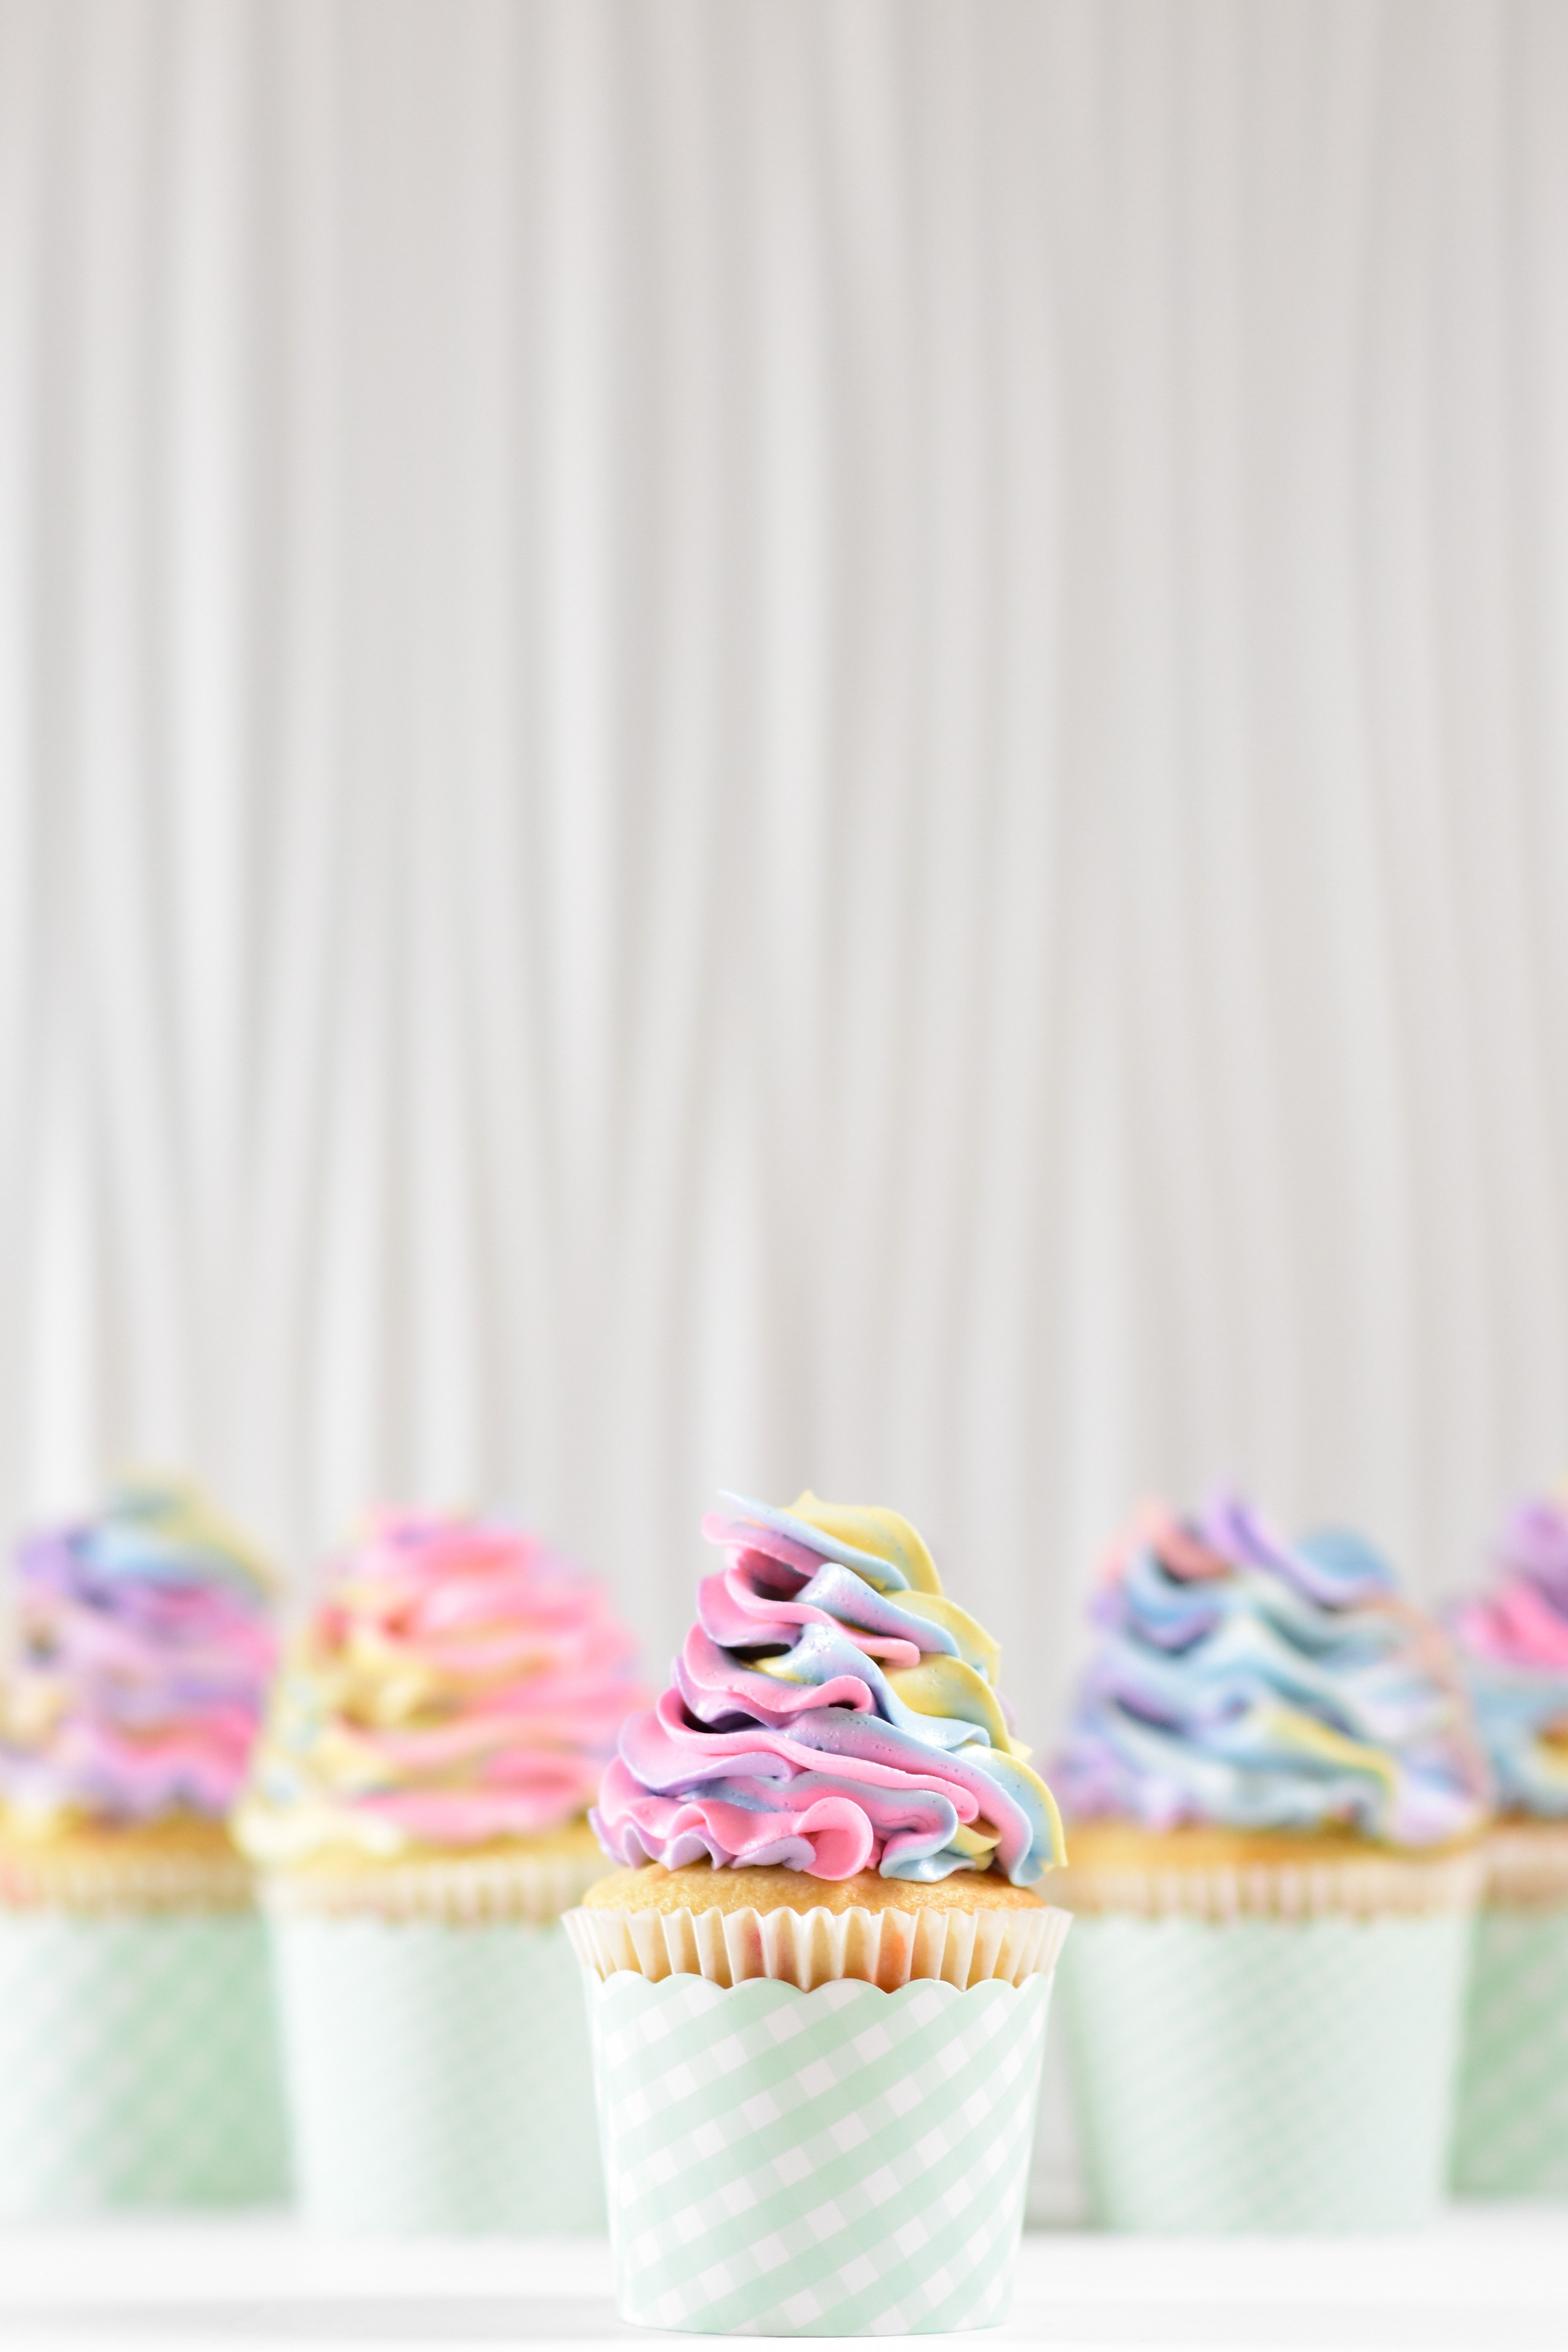 Cupcake Picture. Download Free Image